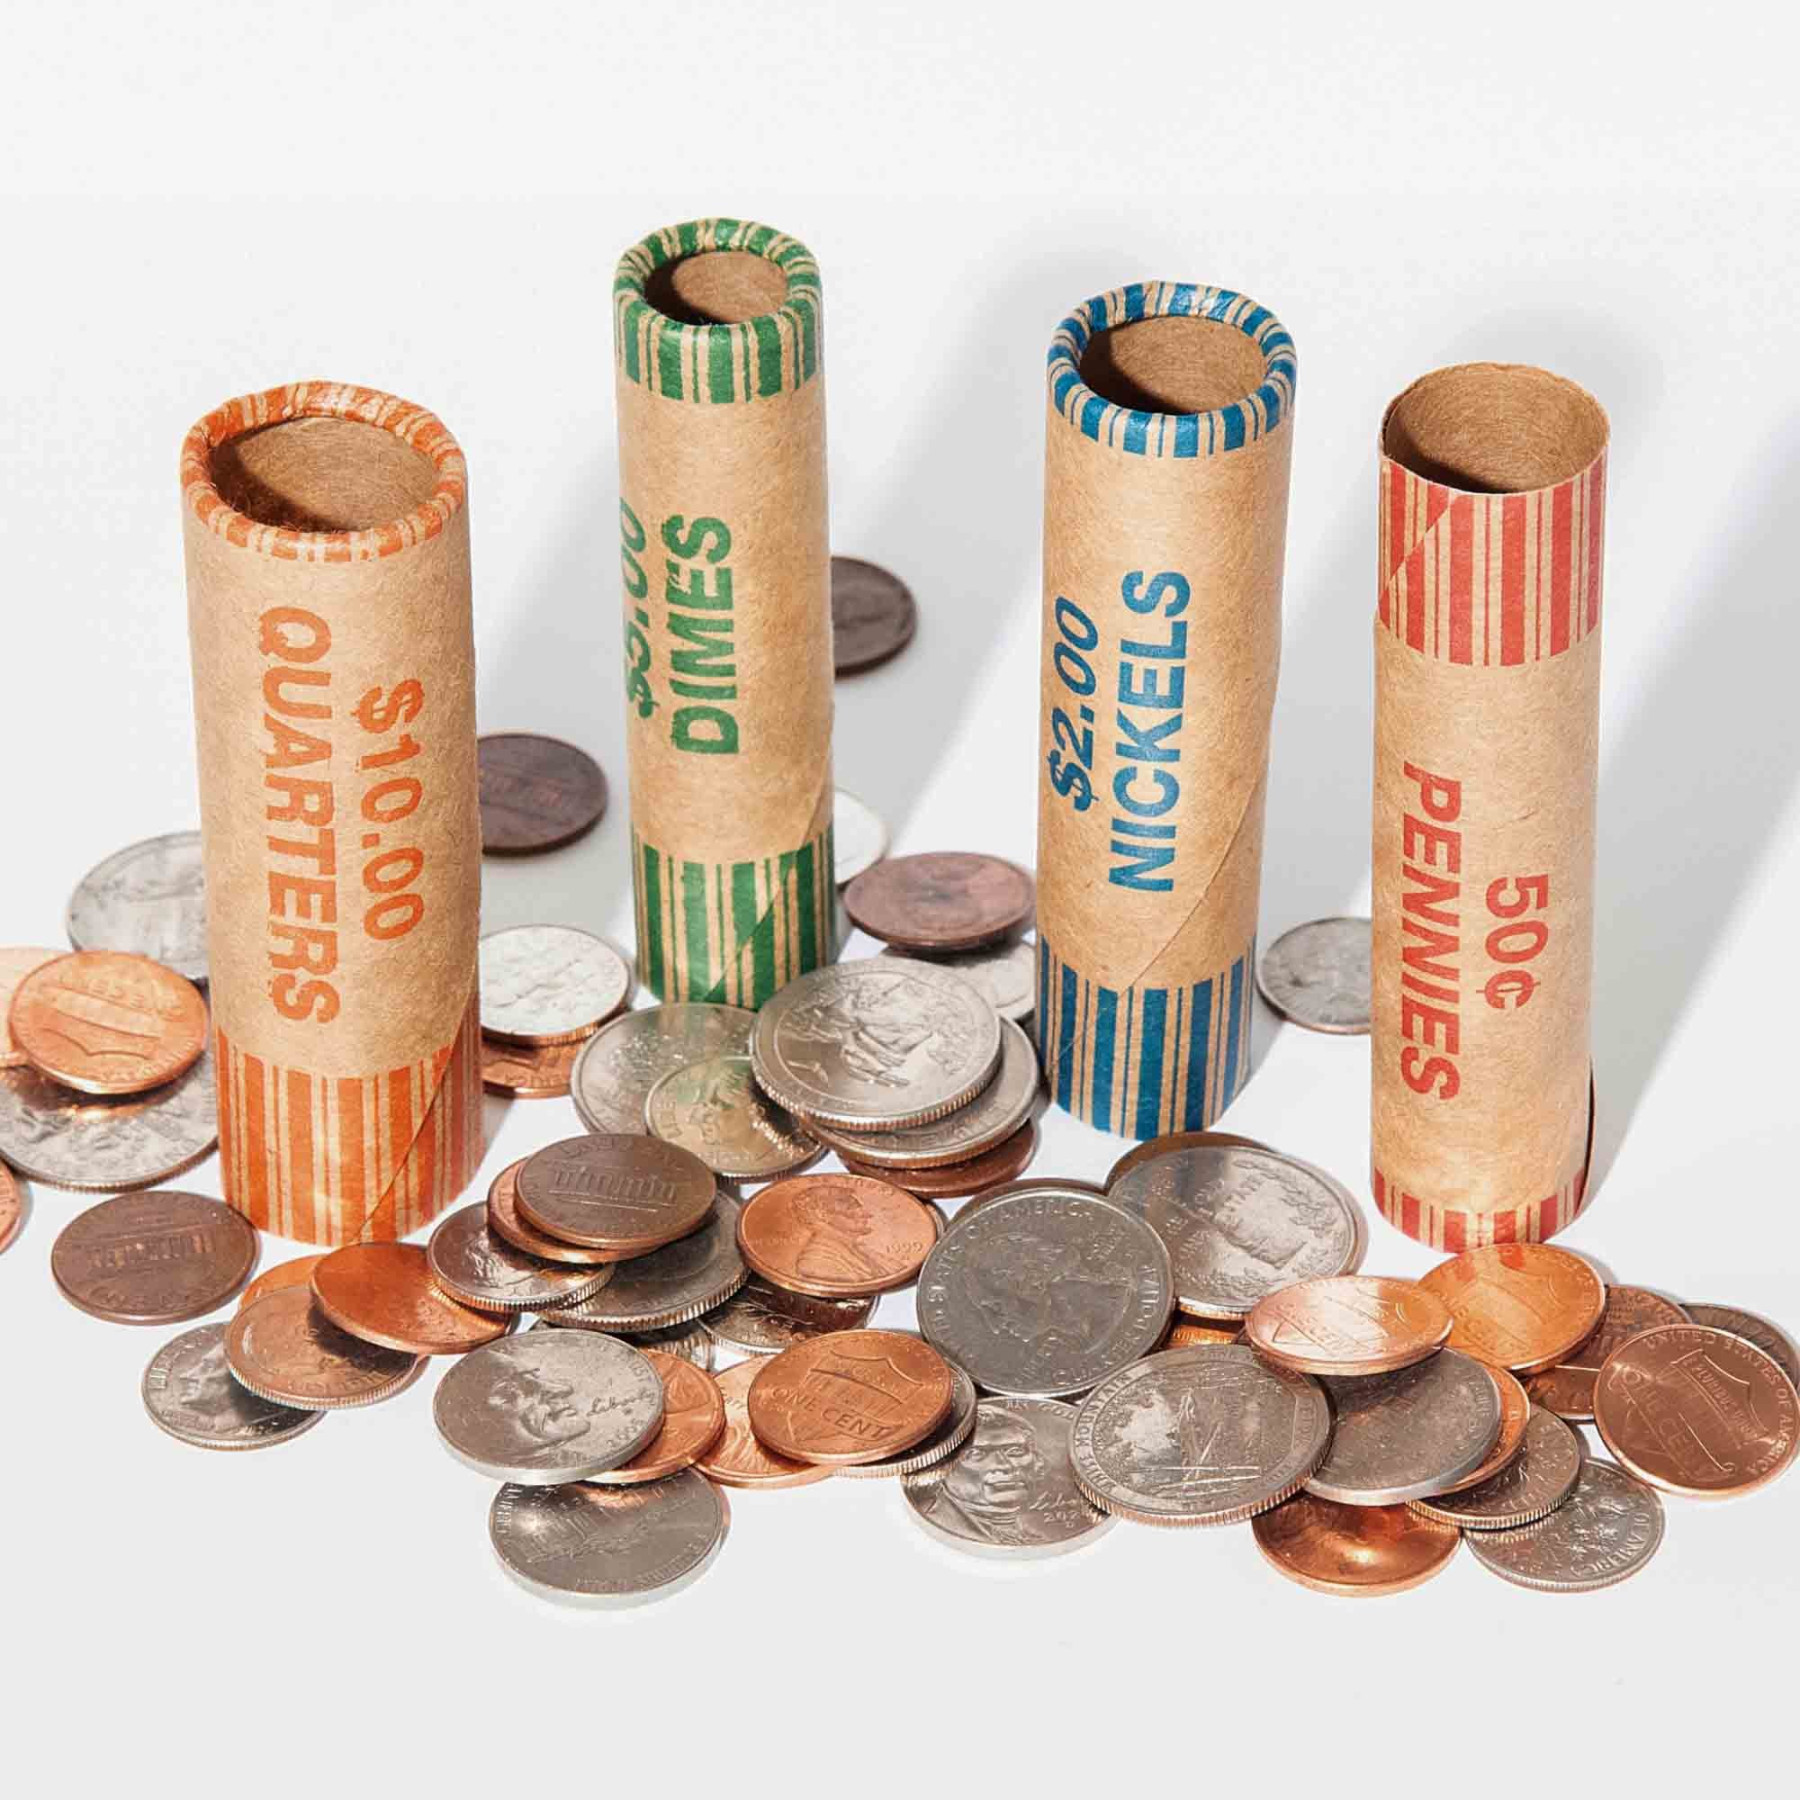 penny coin roll, nickel coin wrapper, dime coin roll, quarter coin wrapper - all shown in use 